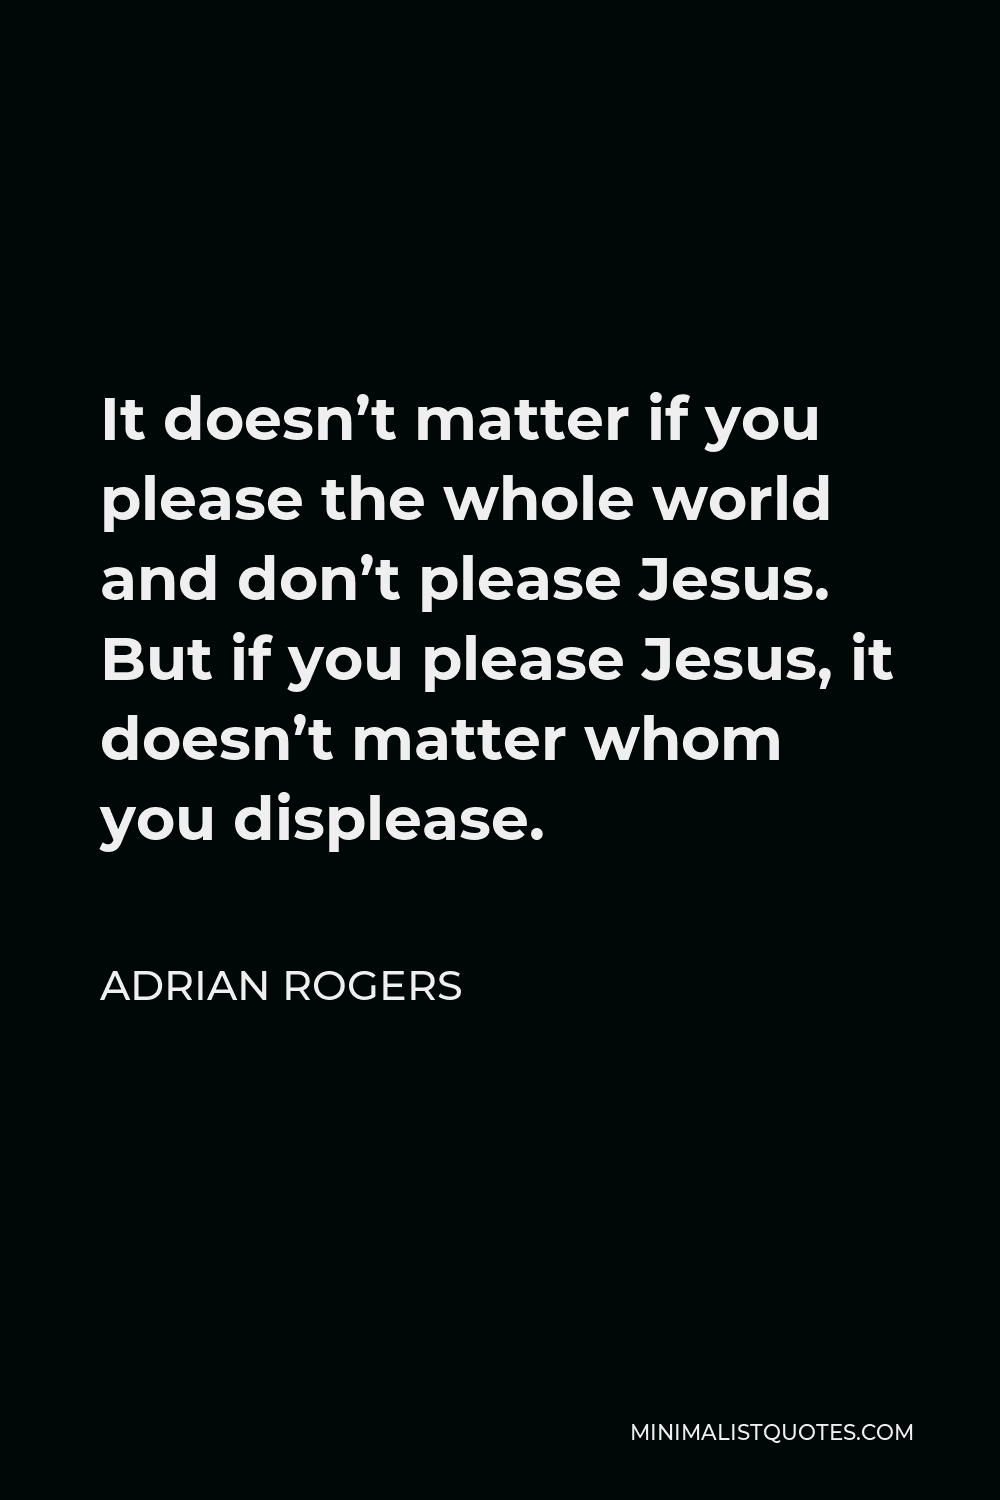 Adrian Rogers Quote - It doesn’t matter if you please the whole world and don’t please Jesus. But if you please Jesus, it doesn’t matter whom you displease.